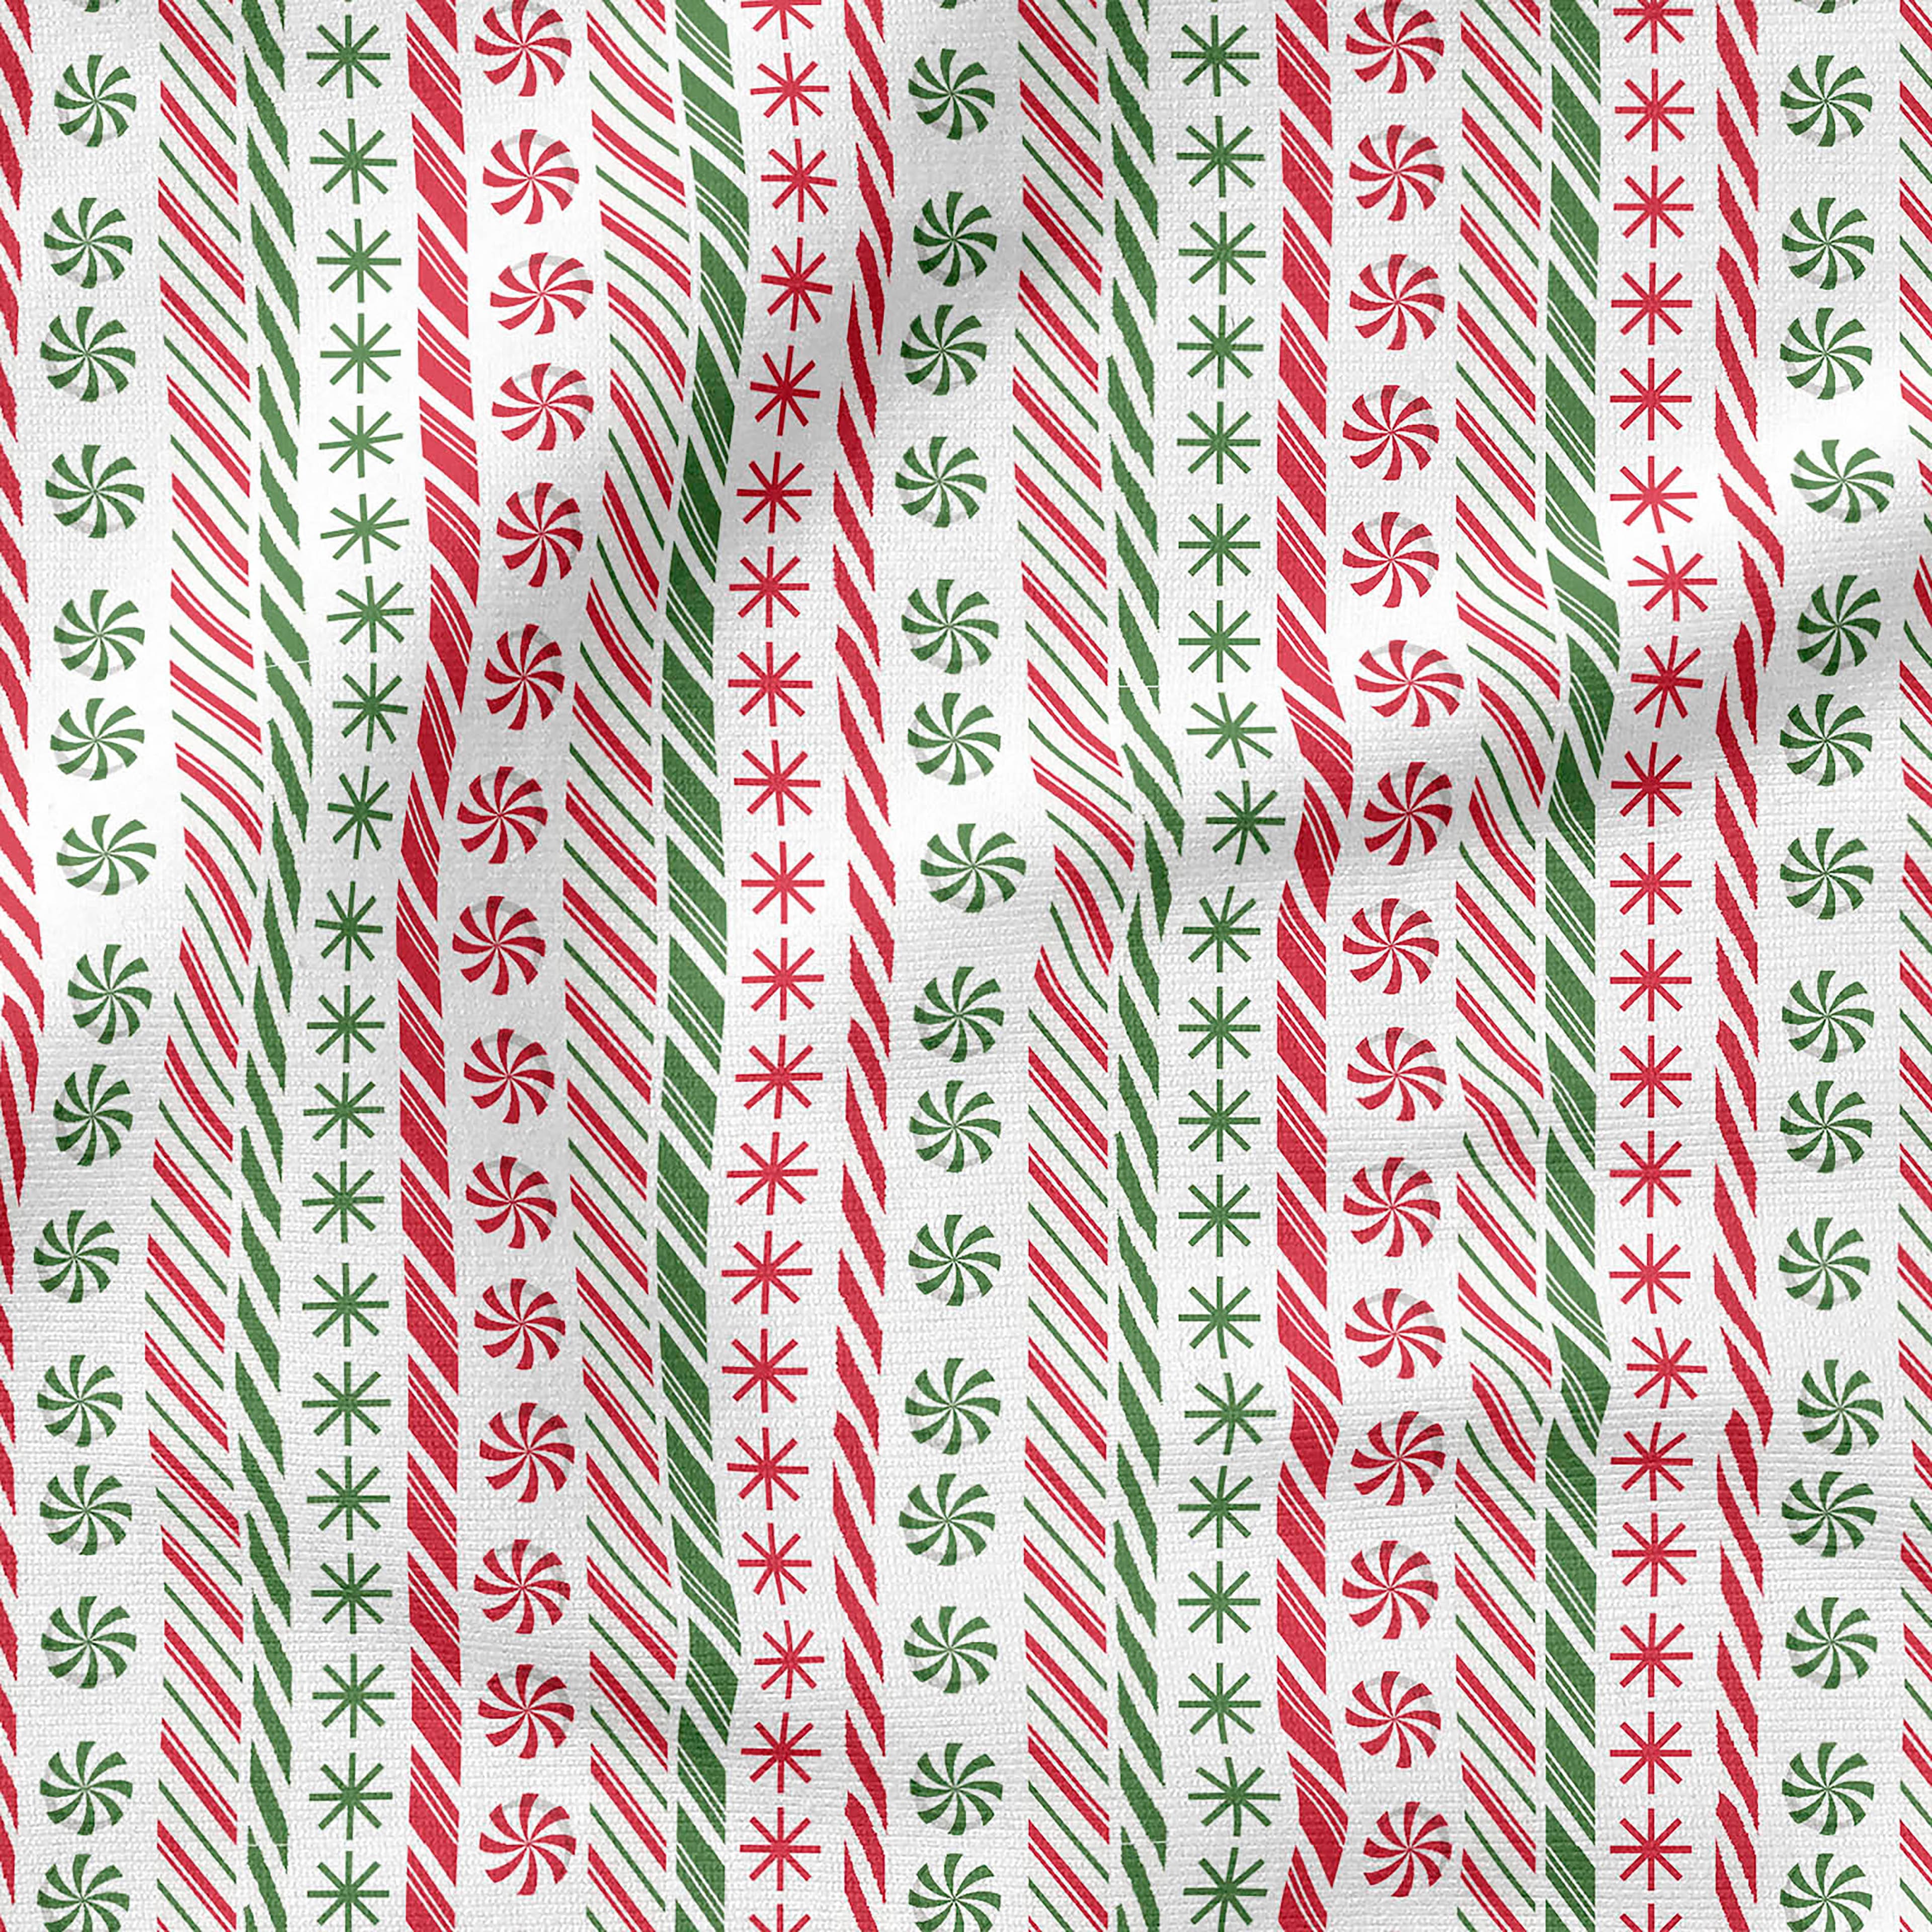 Fabric Editions Peppermint Stripe Cotton Fabric